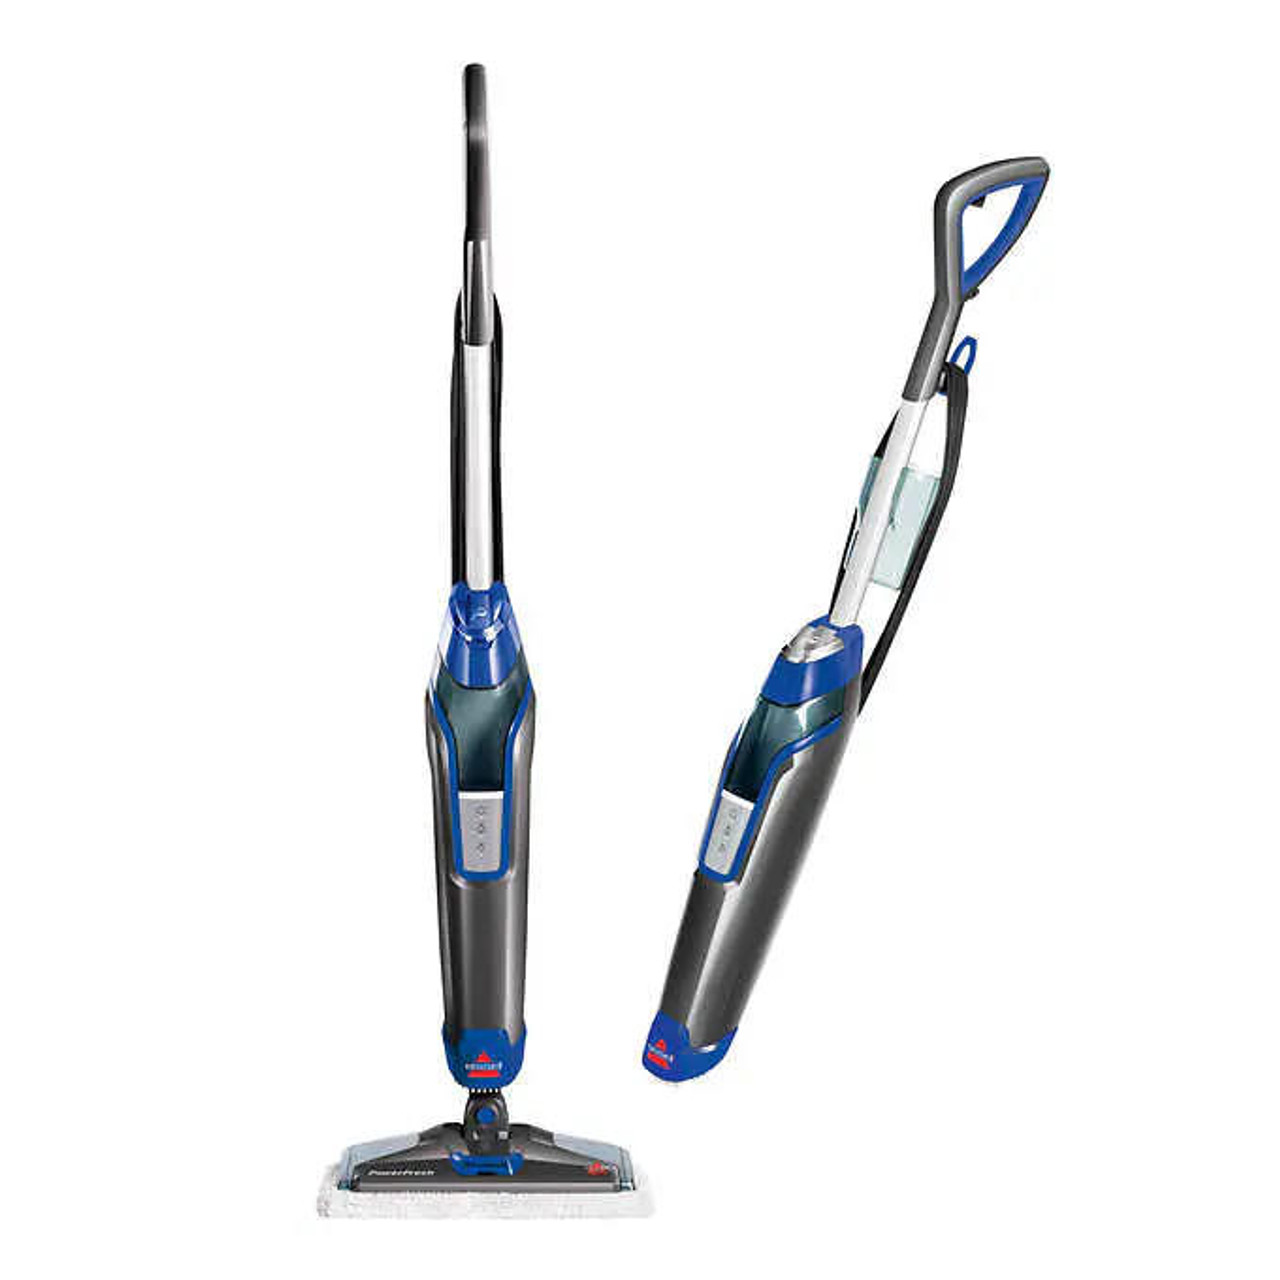 https://cdn11.bigcommerce.com/s-g5ygv2at8j/images/stencil/1280x1280/products/13561/30561/bissell-bissell-powersteamer-deluxe-steam-mop__01955.1694558663.jpg?c=1